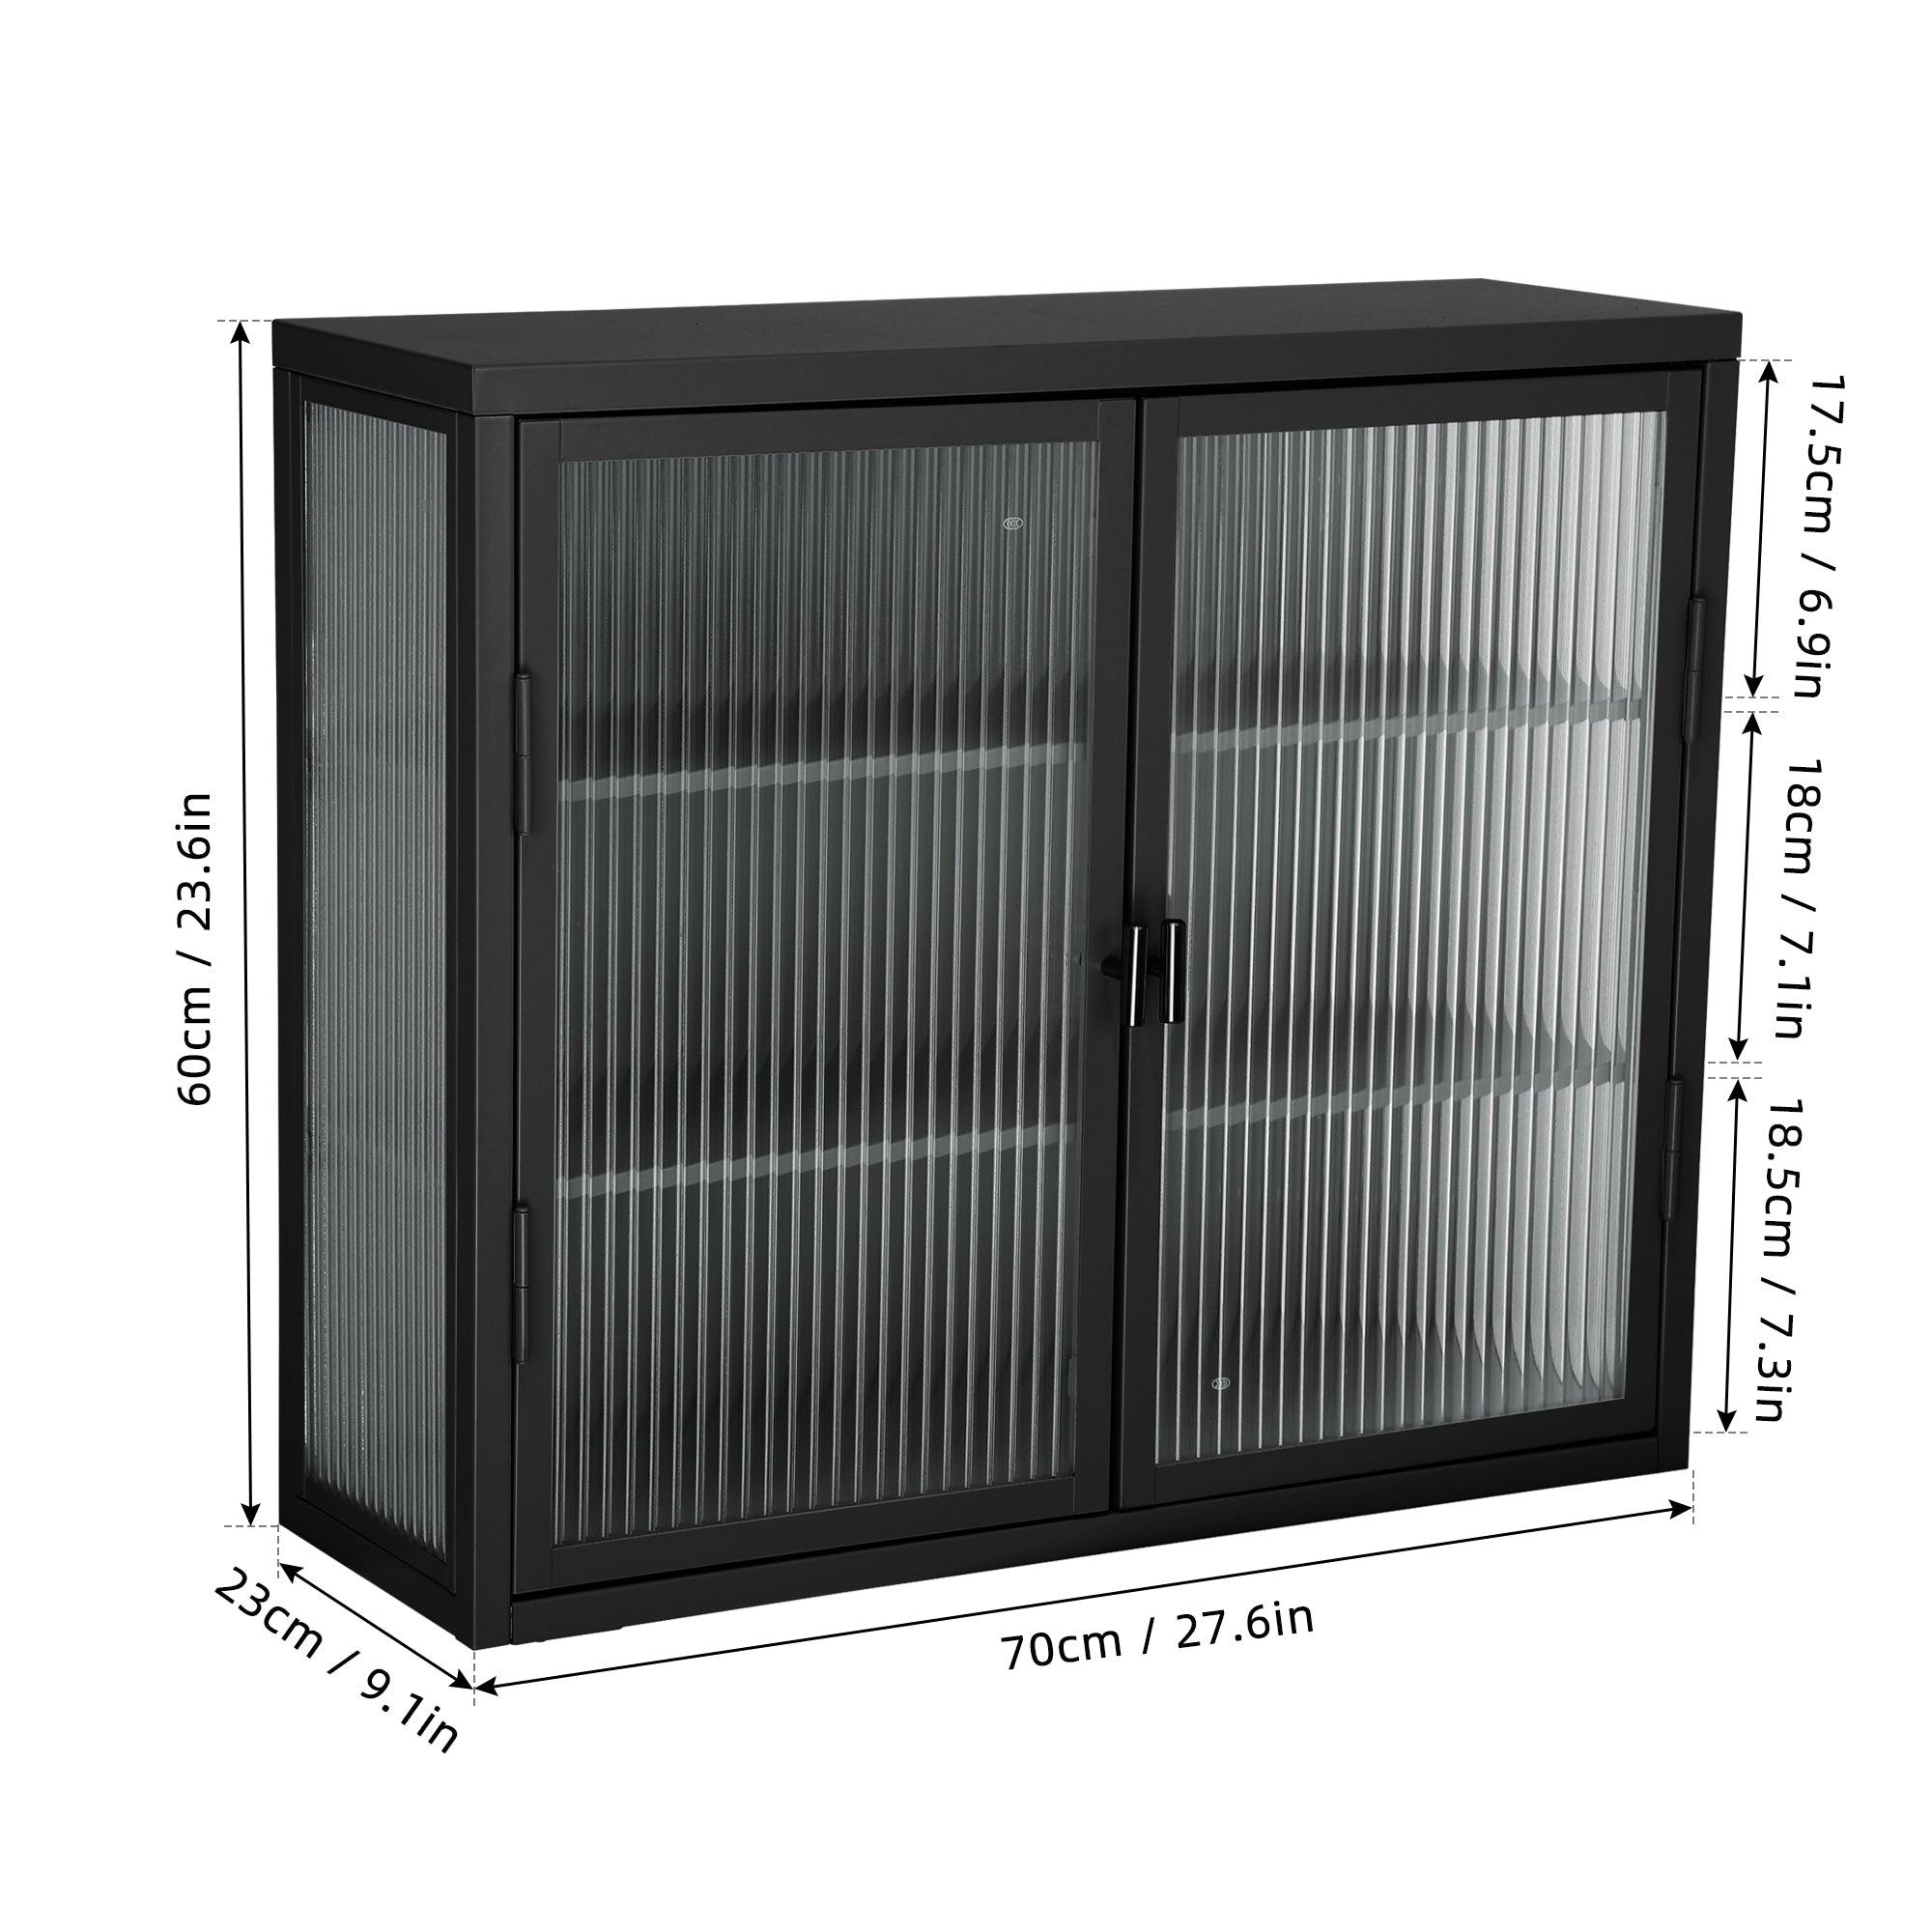 🆓🚛 Retro Style Haze Double Glass Door Wall Cabinet With Detachable Shelves for Office, Dining Room, Living Room, Kitchen & Bathroom, Black